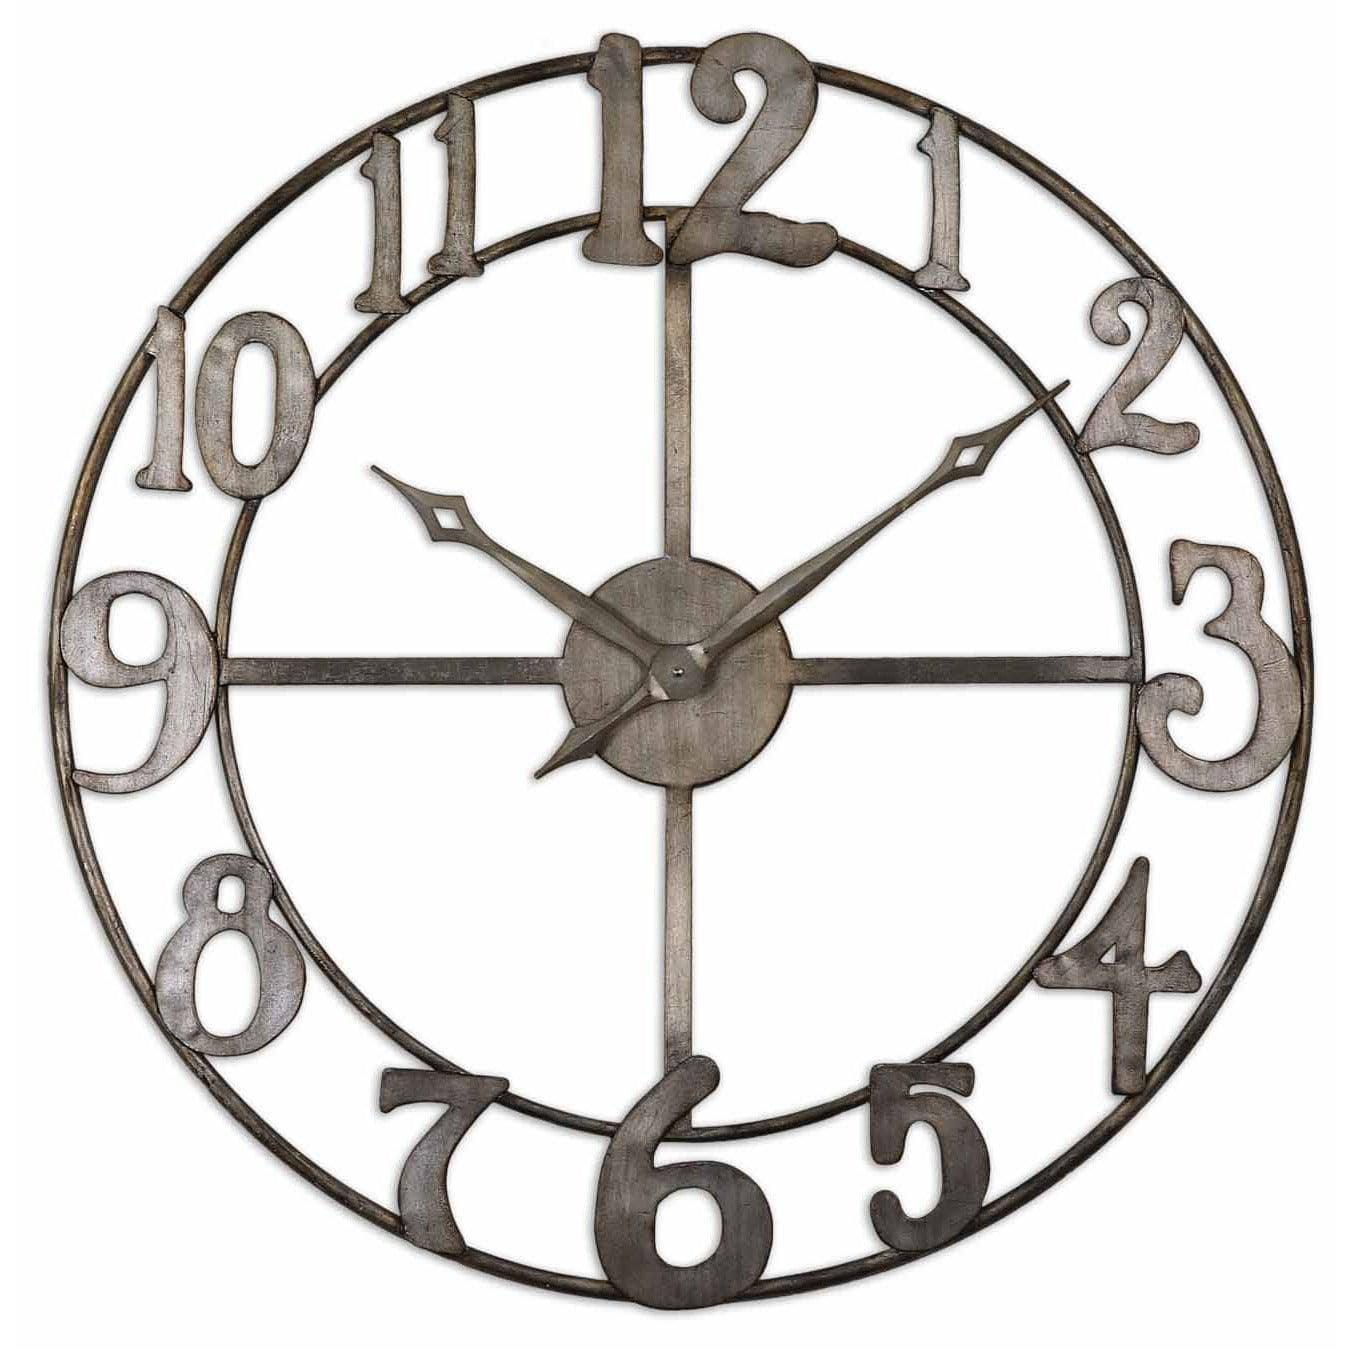 The Uttermost - Delevan Wall Clock - 06681 | Montreal Lighting & Hardware